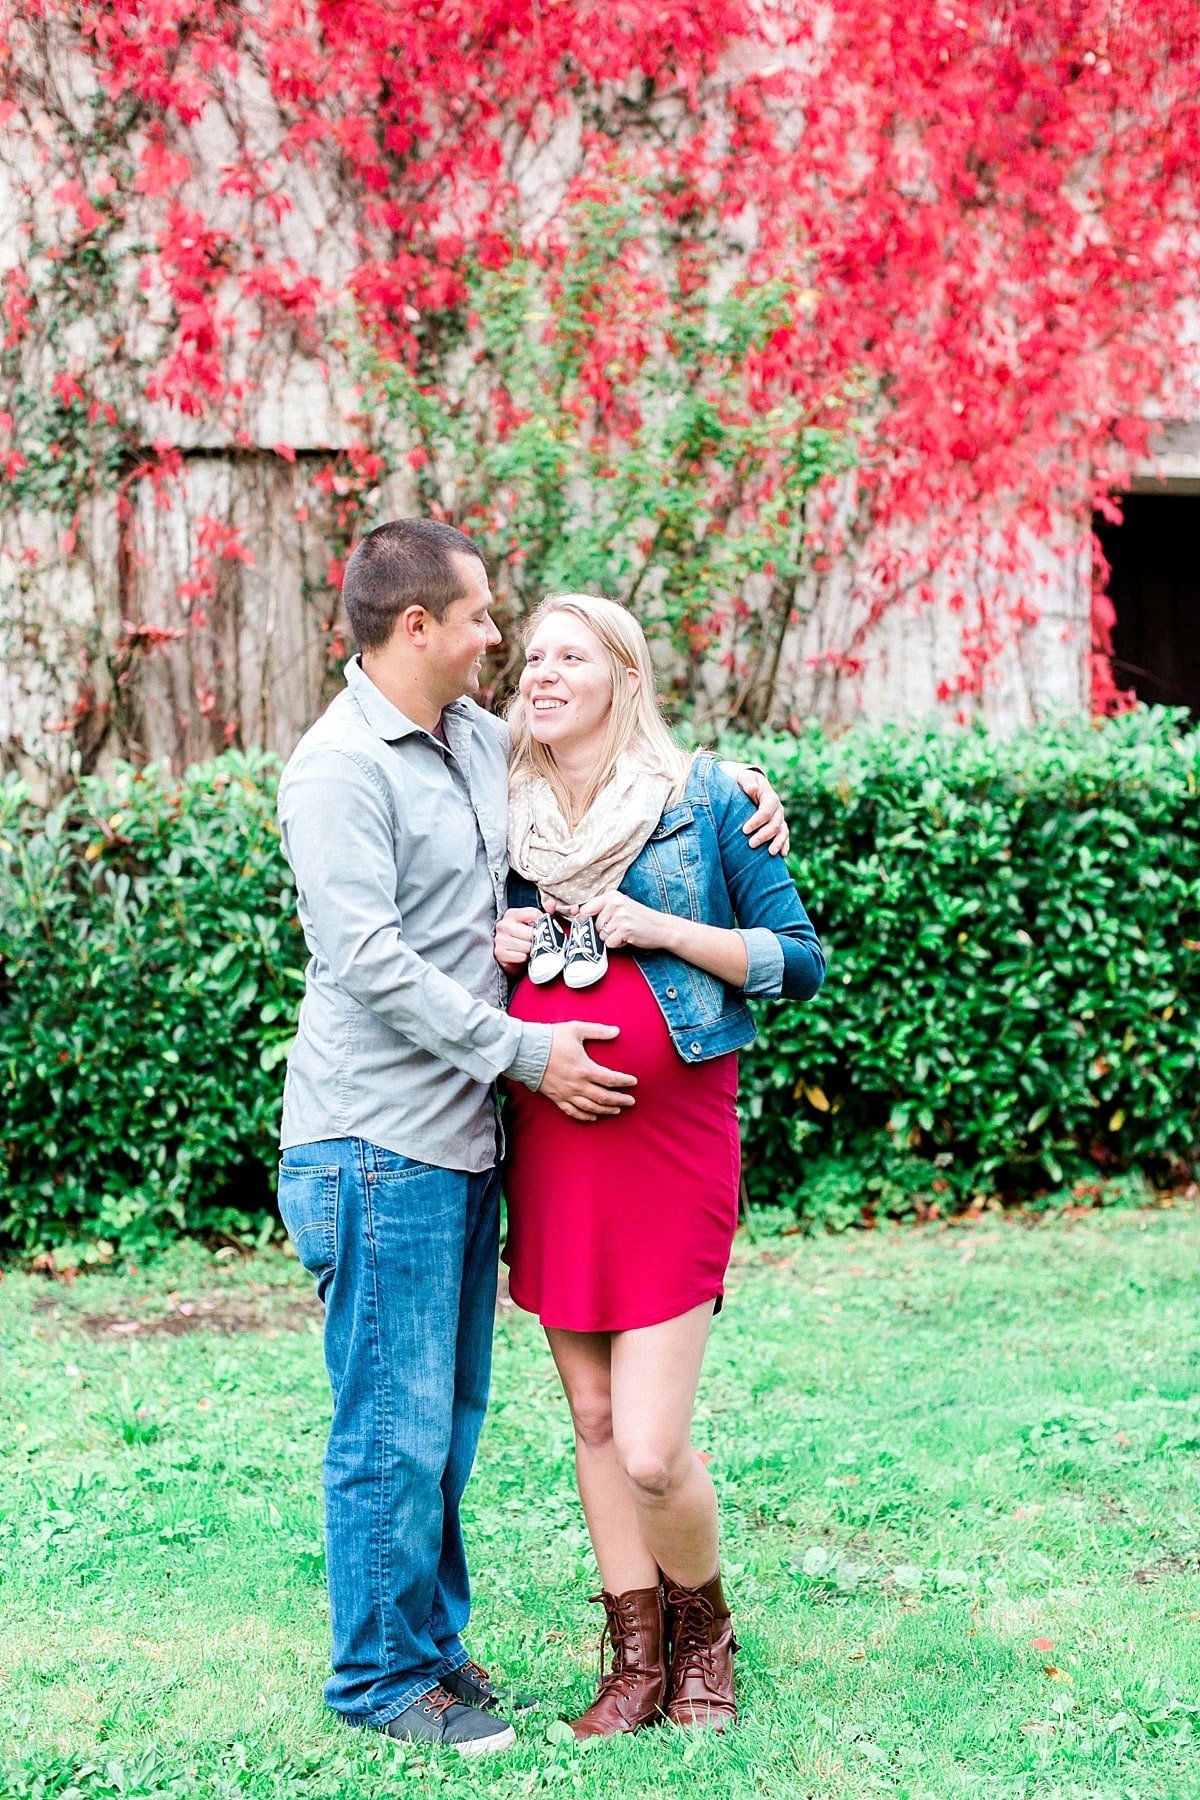 Fall Houston Maternity photography session photographed by Alicia Yarrish Photography